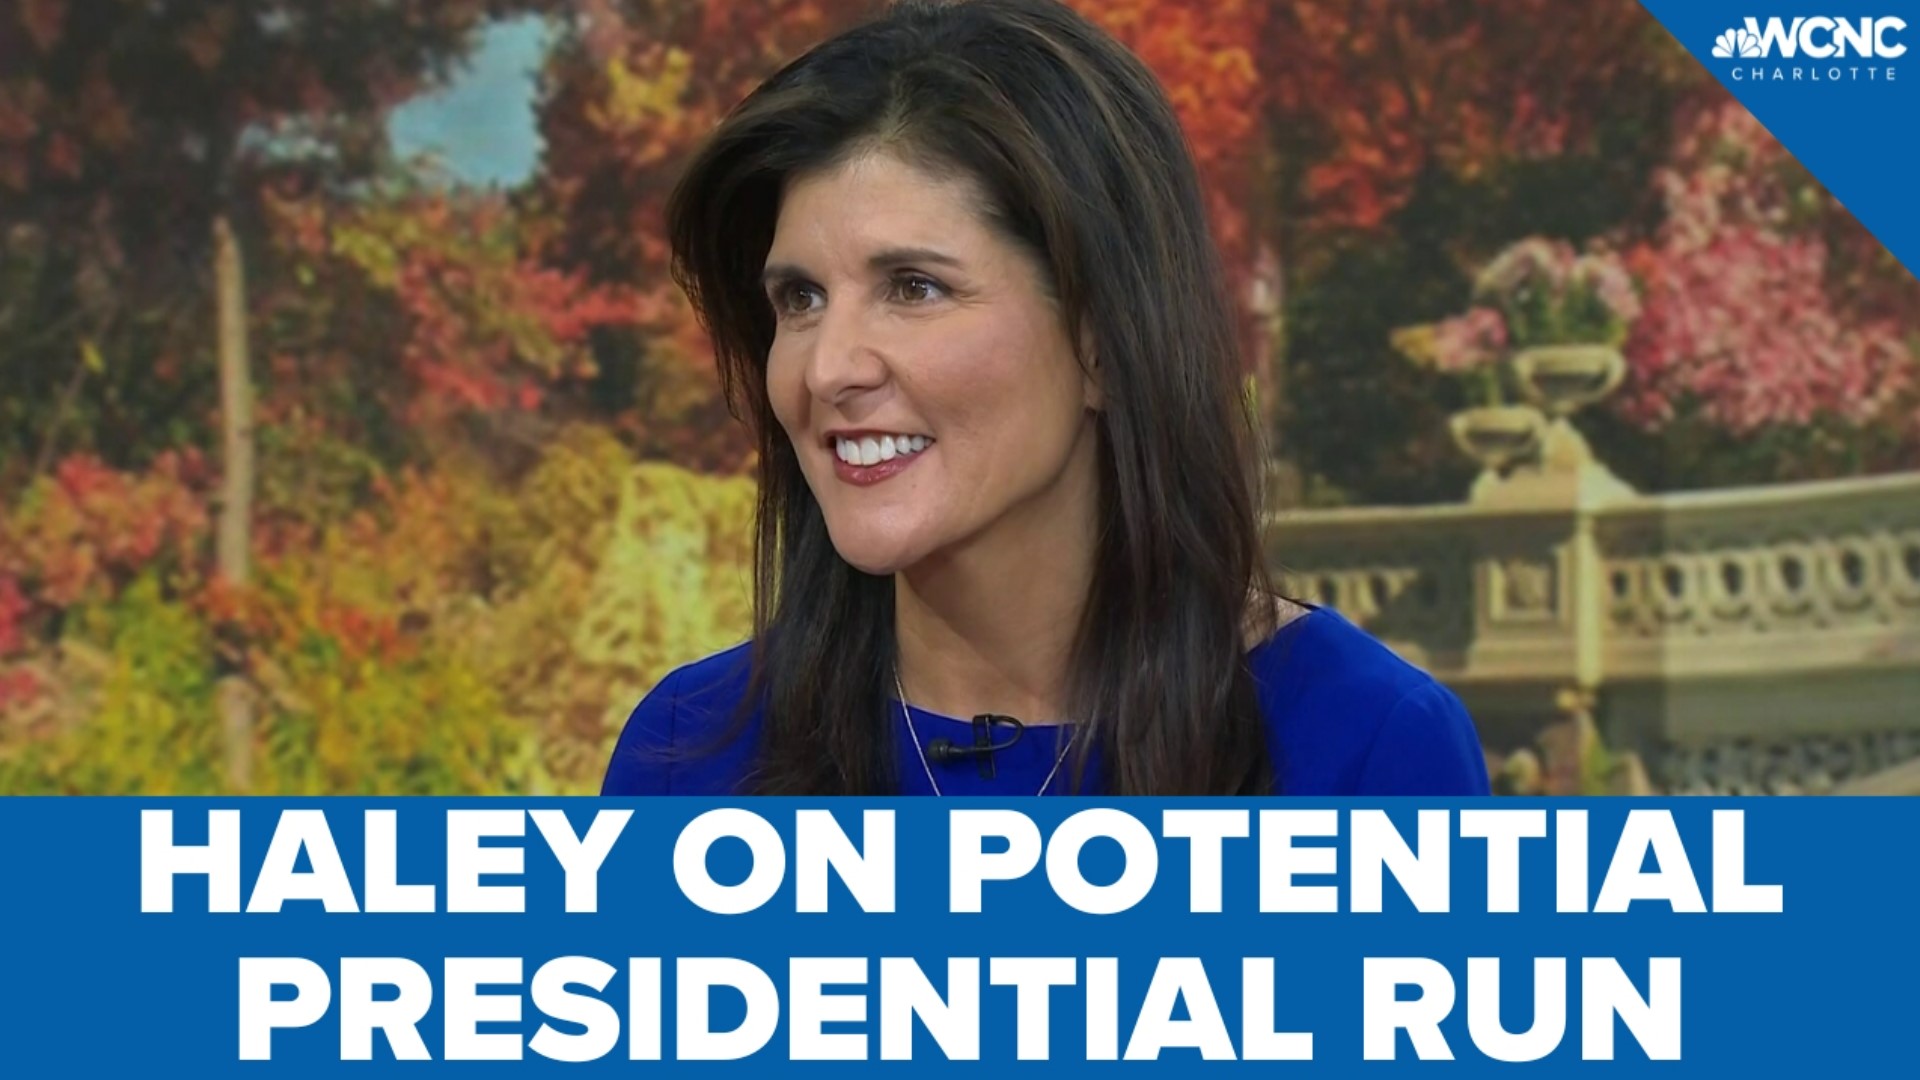 Nikki Haley said she will give a 2024 presidential campaign serious consideration during an appearance on NBC's "Today."